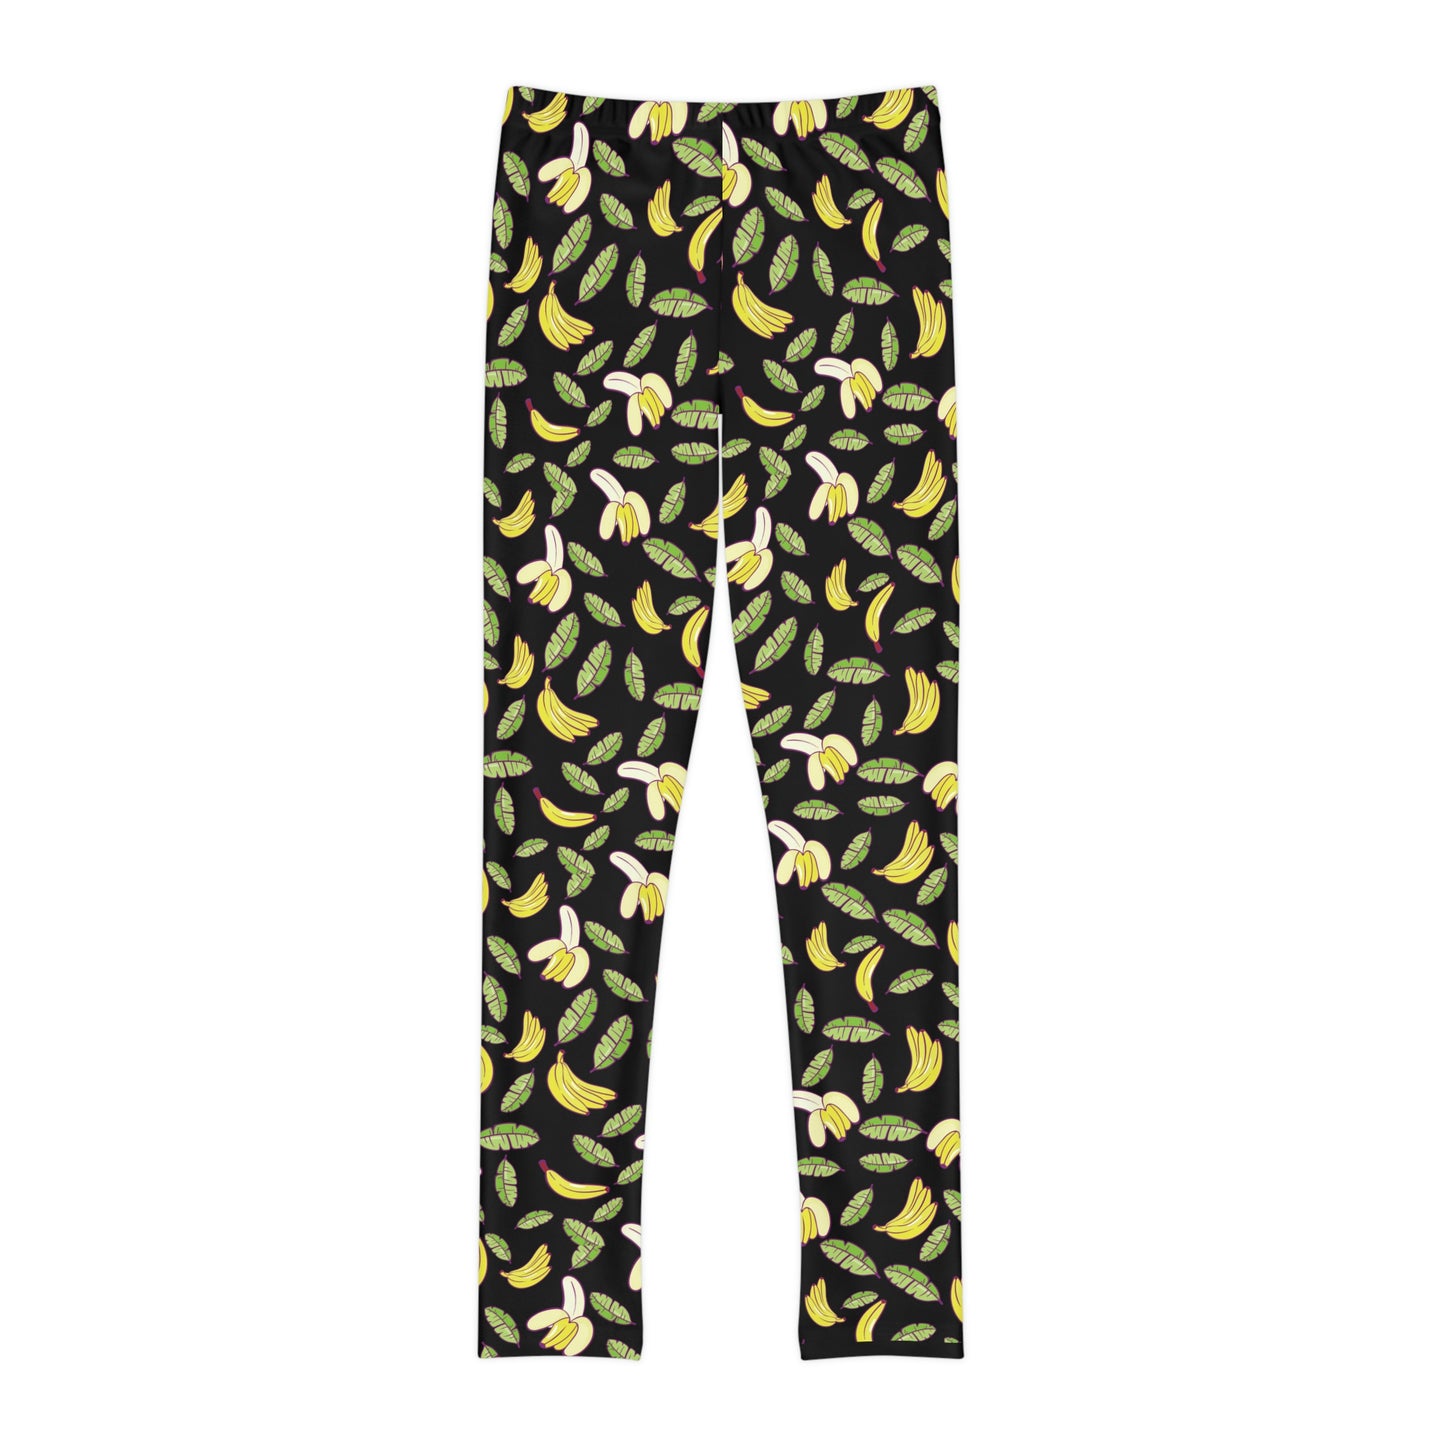 Bananas Print Youth Leggings,  One of a Kind Gift - Unique Workout Activewear tights for  kids Fitness , Daughter, Niece  Christmas Gift